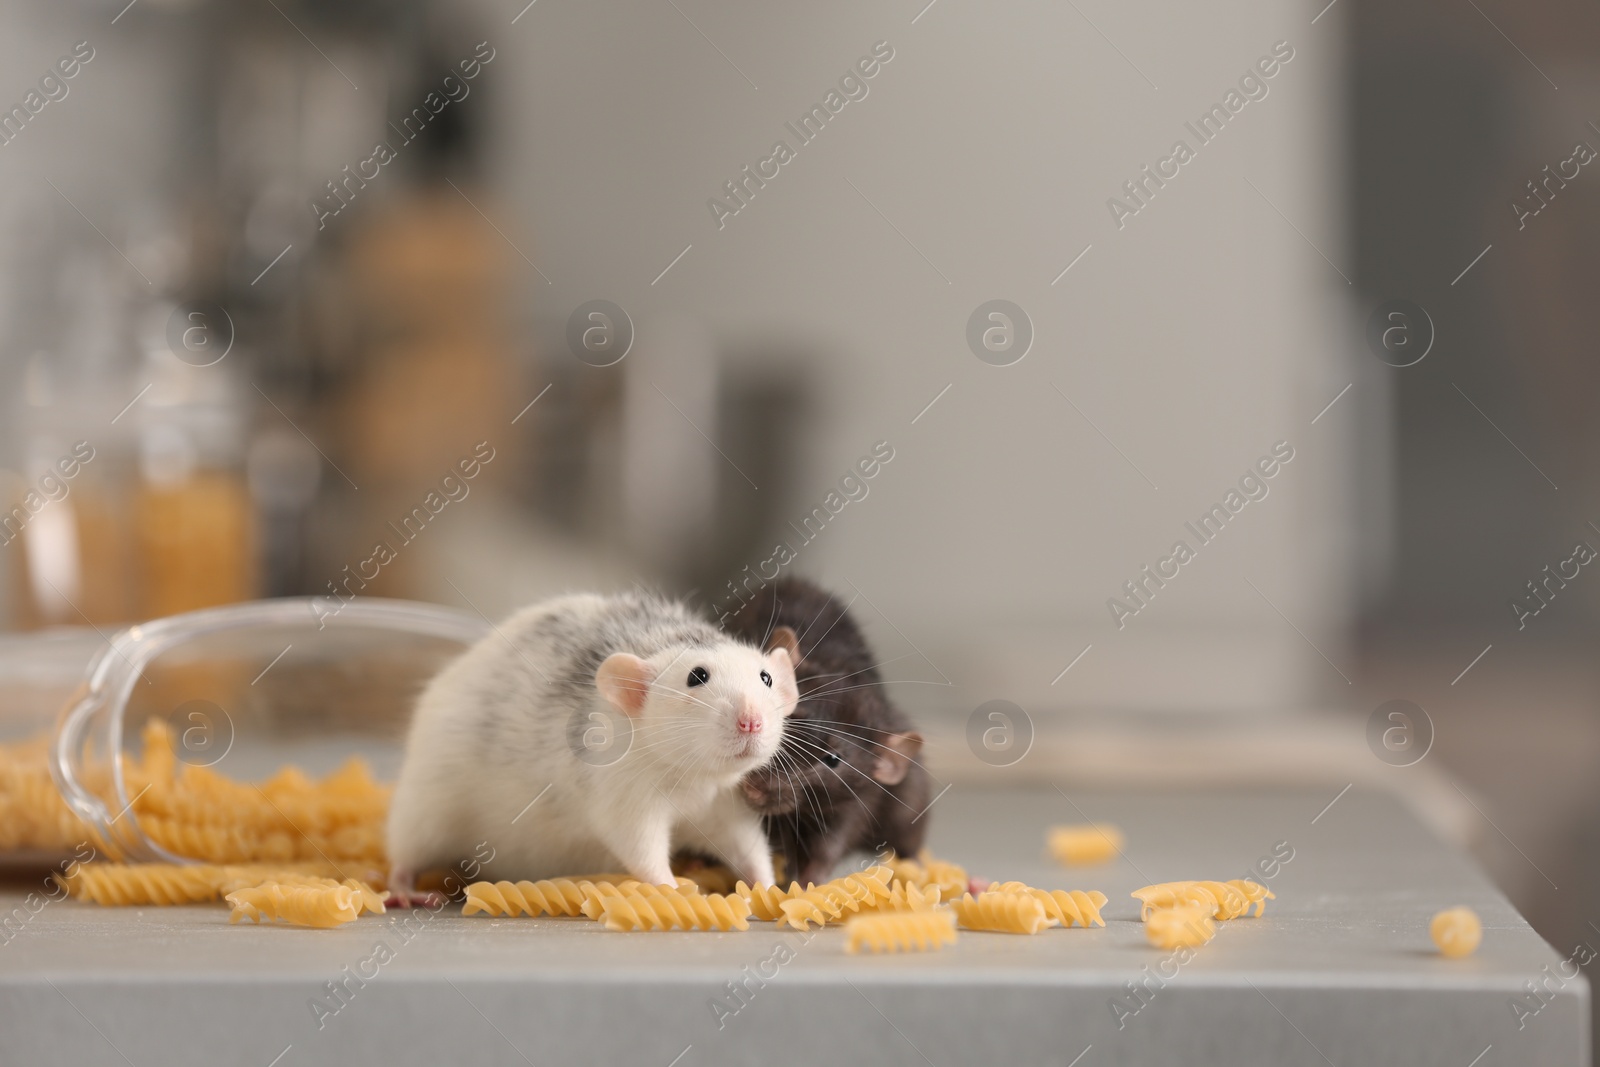 Photo of Rats near open container with pasta on kitchen counter. Household pest